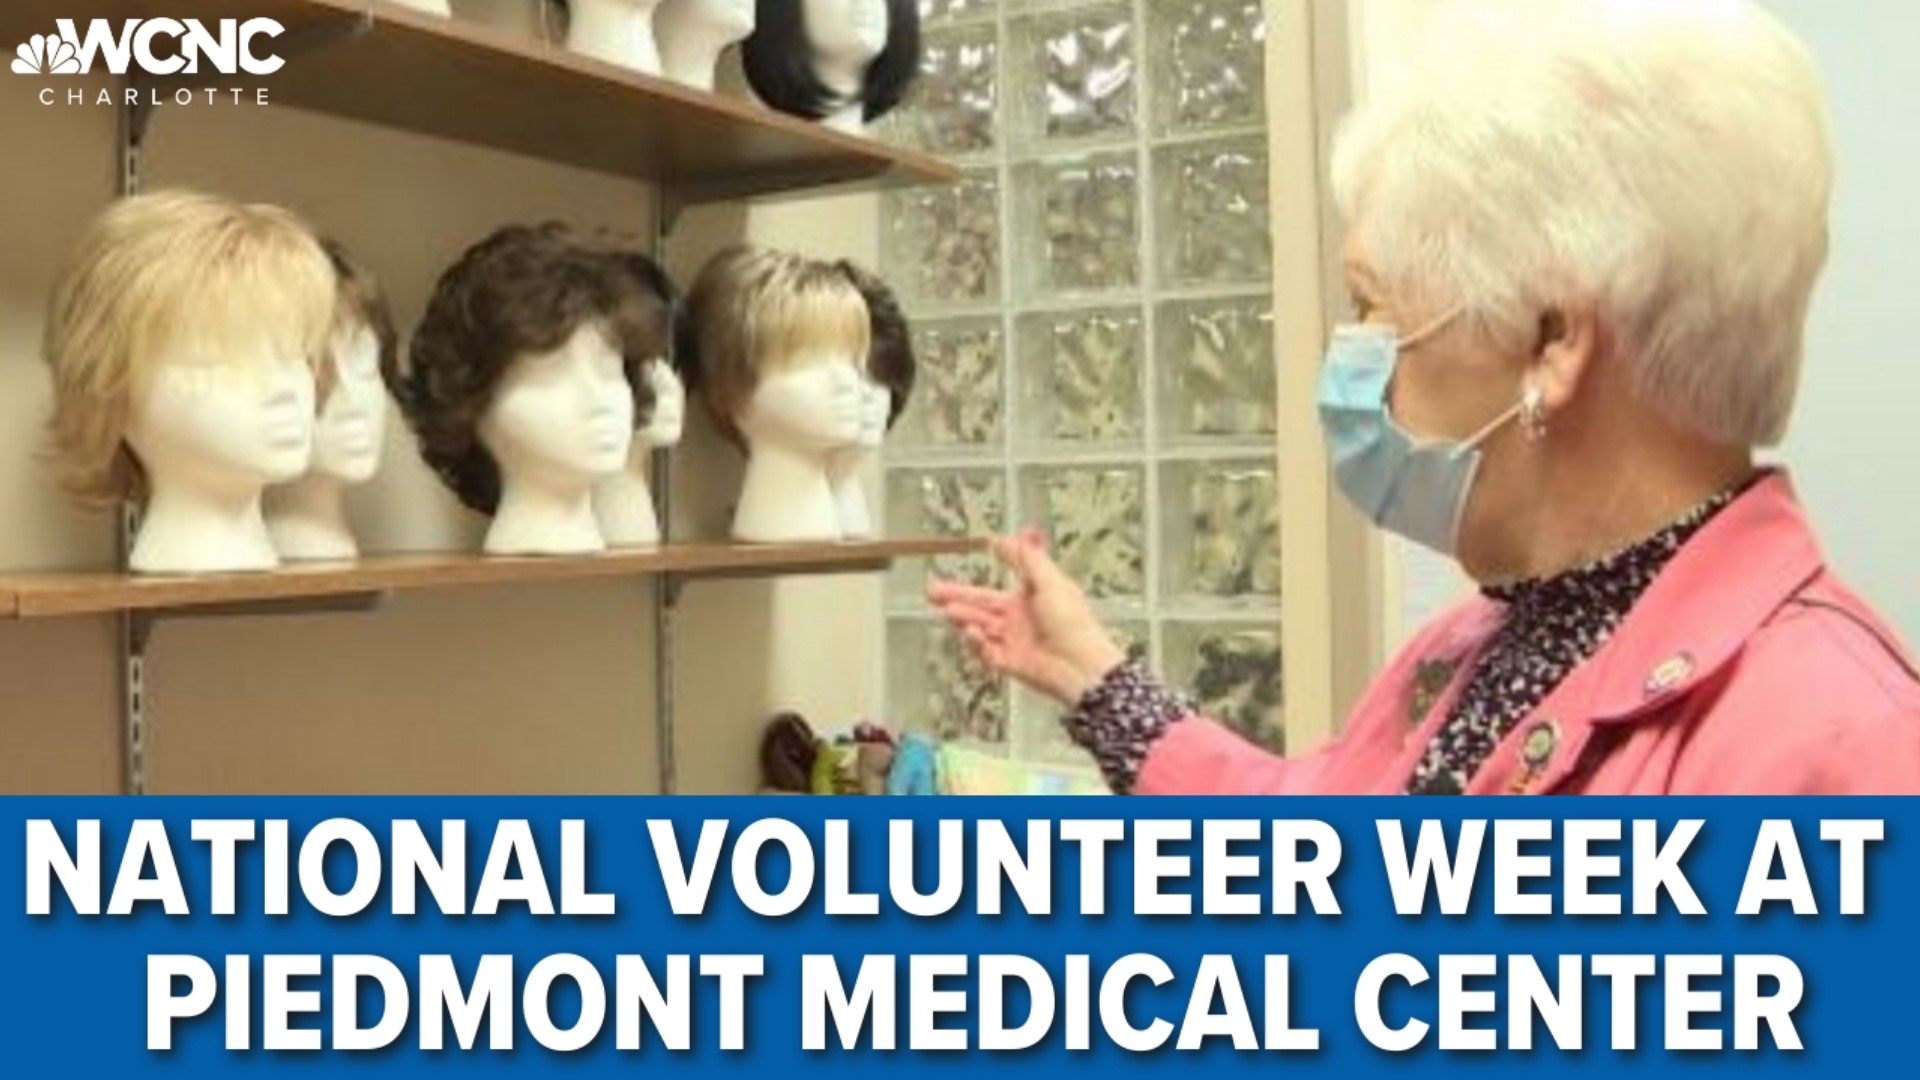 Battling cancer is no easy journey, but at Piedmont Medical Center they have a group of volunteers who help make that process a bit easier.